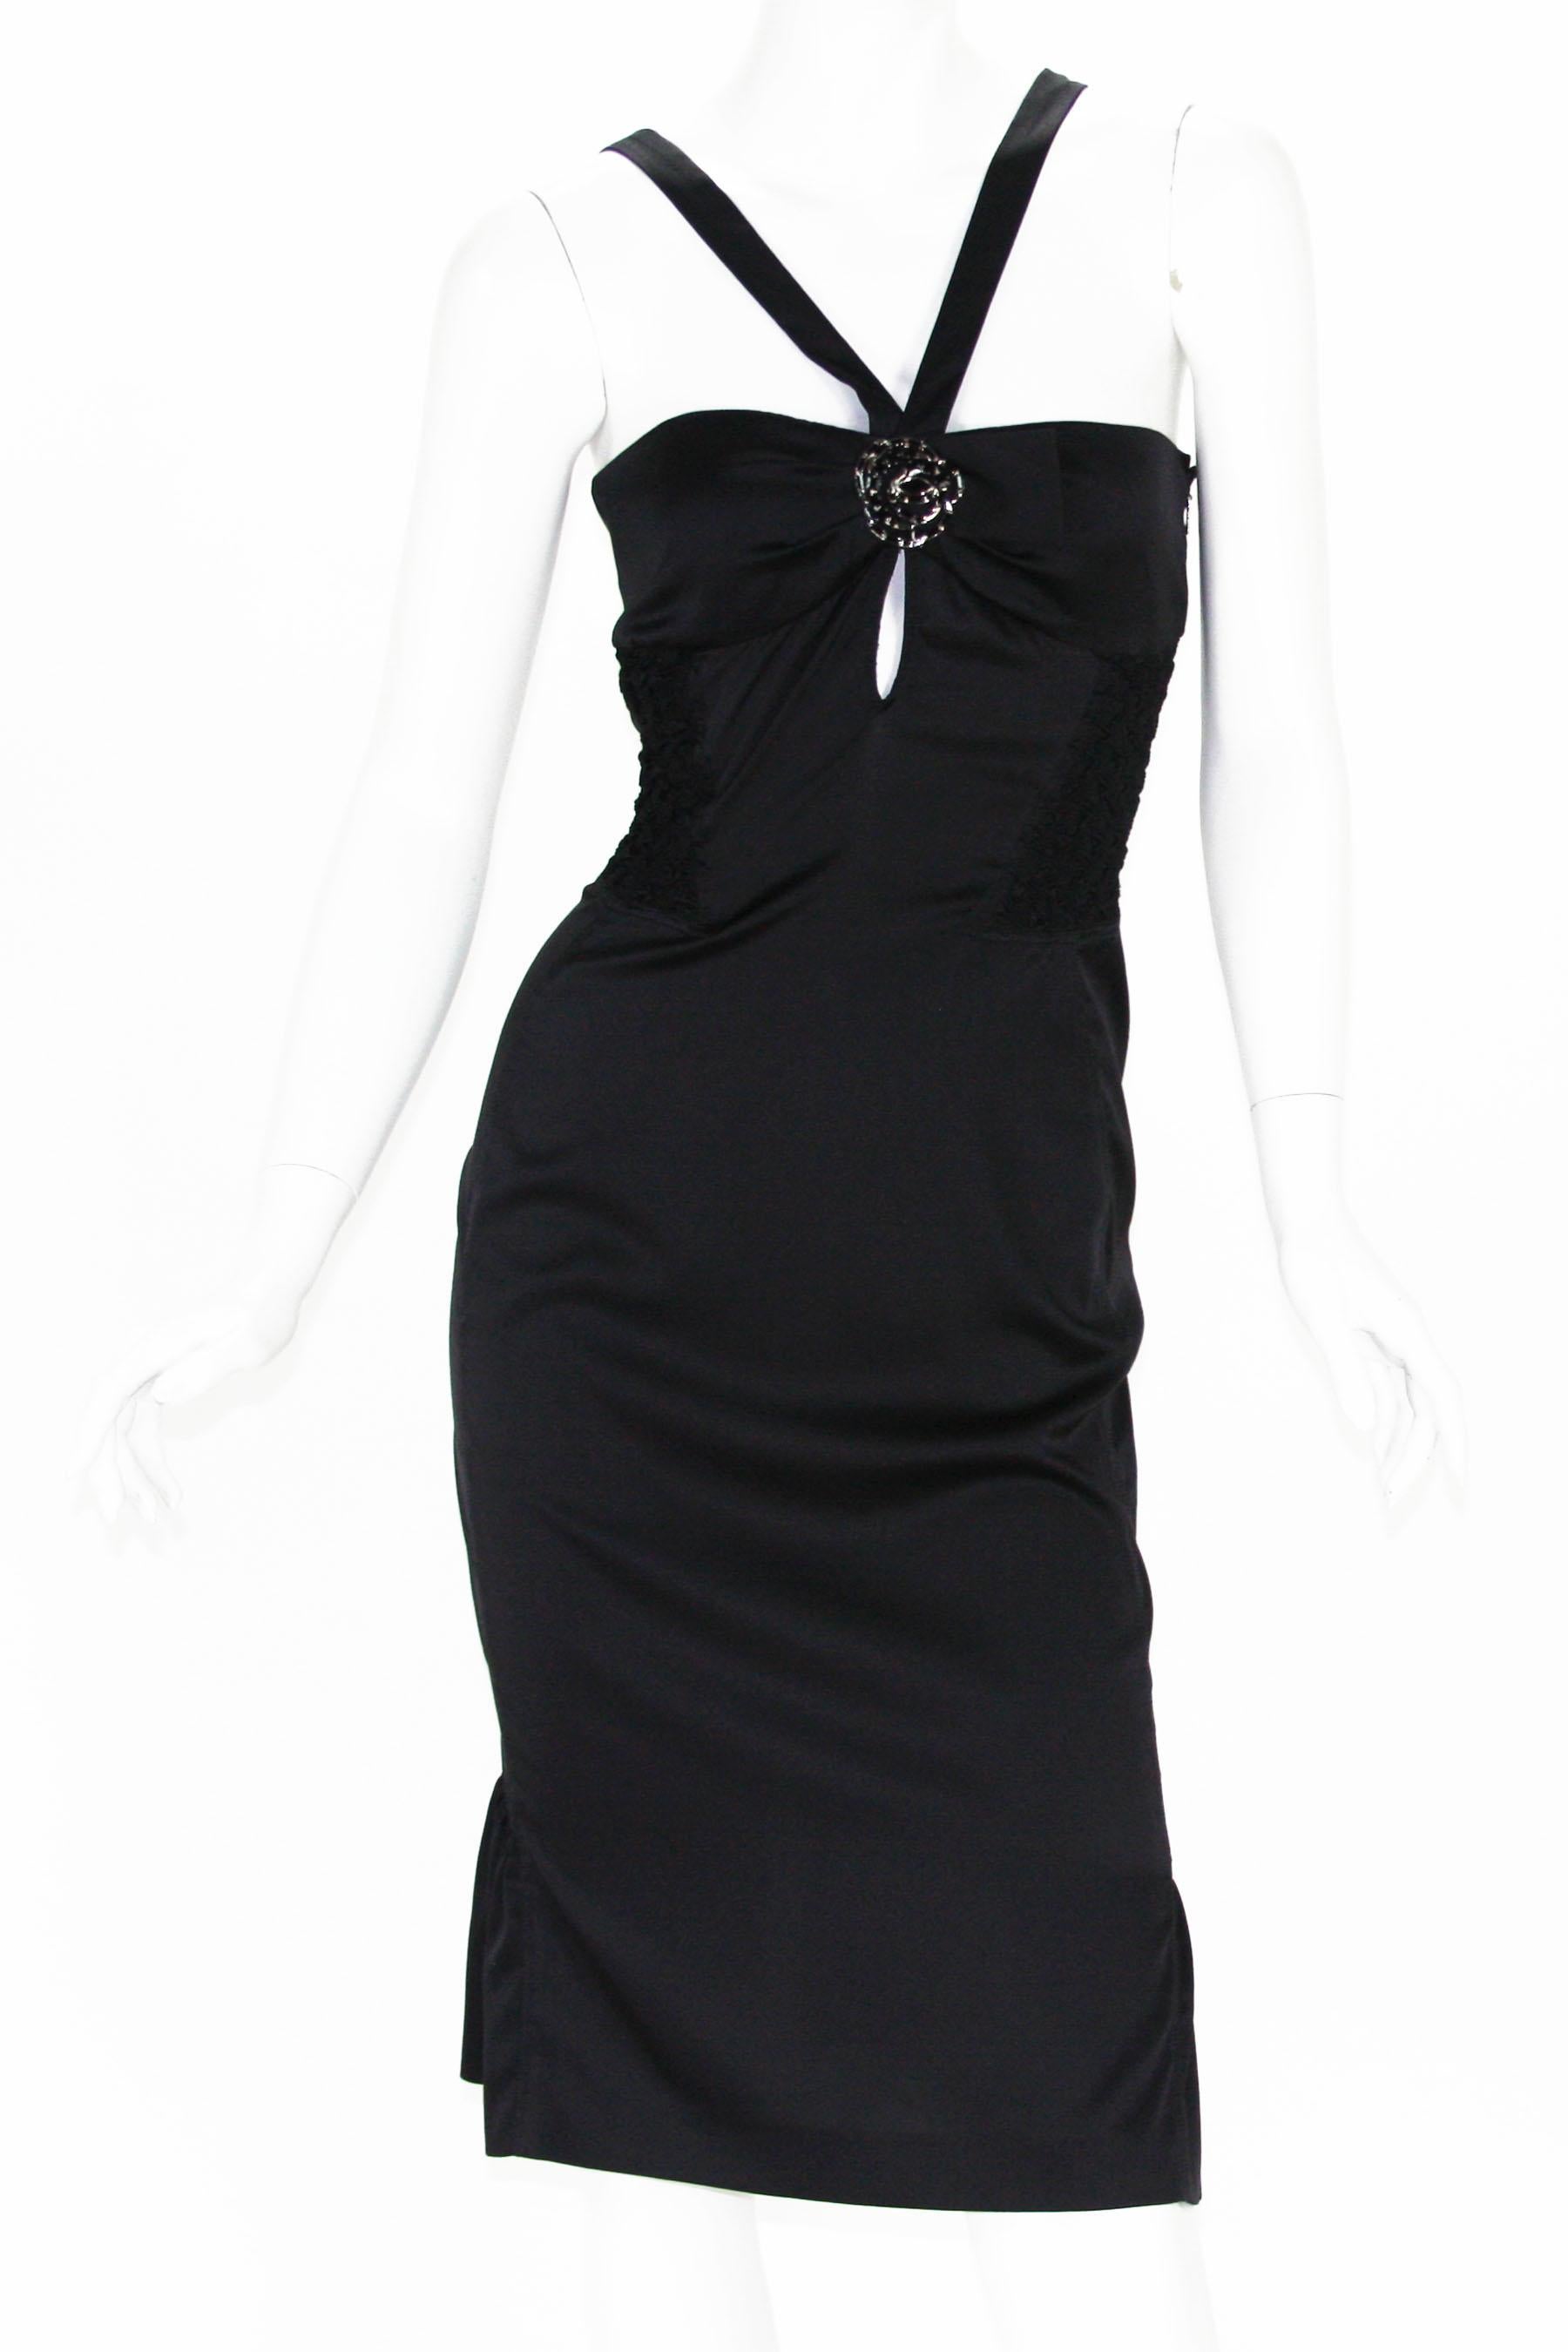 Tom Ford for Gucci Black Silk Stretch Cocktail Dress with Brooch
2004 Collection
Designer size 40 -  US 4
Black Stretch Silk Cocktail Dress, Black Crystals Removable Brooch with Gucci Engraving on Back, Keyhole Detail, Smocked Stretch Panels Insert,